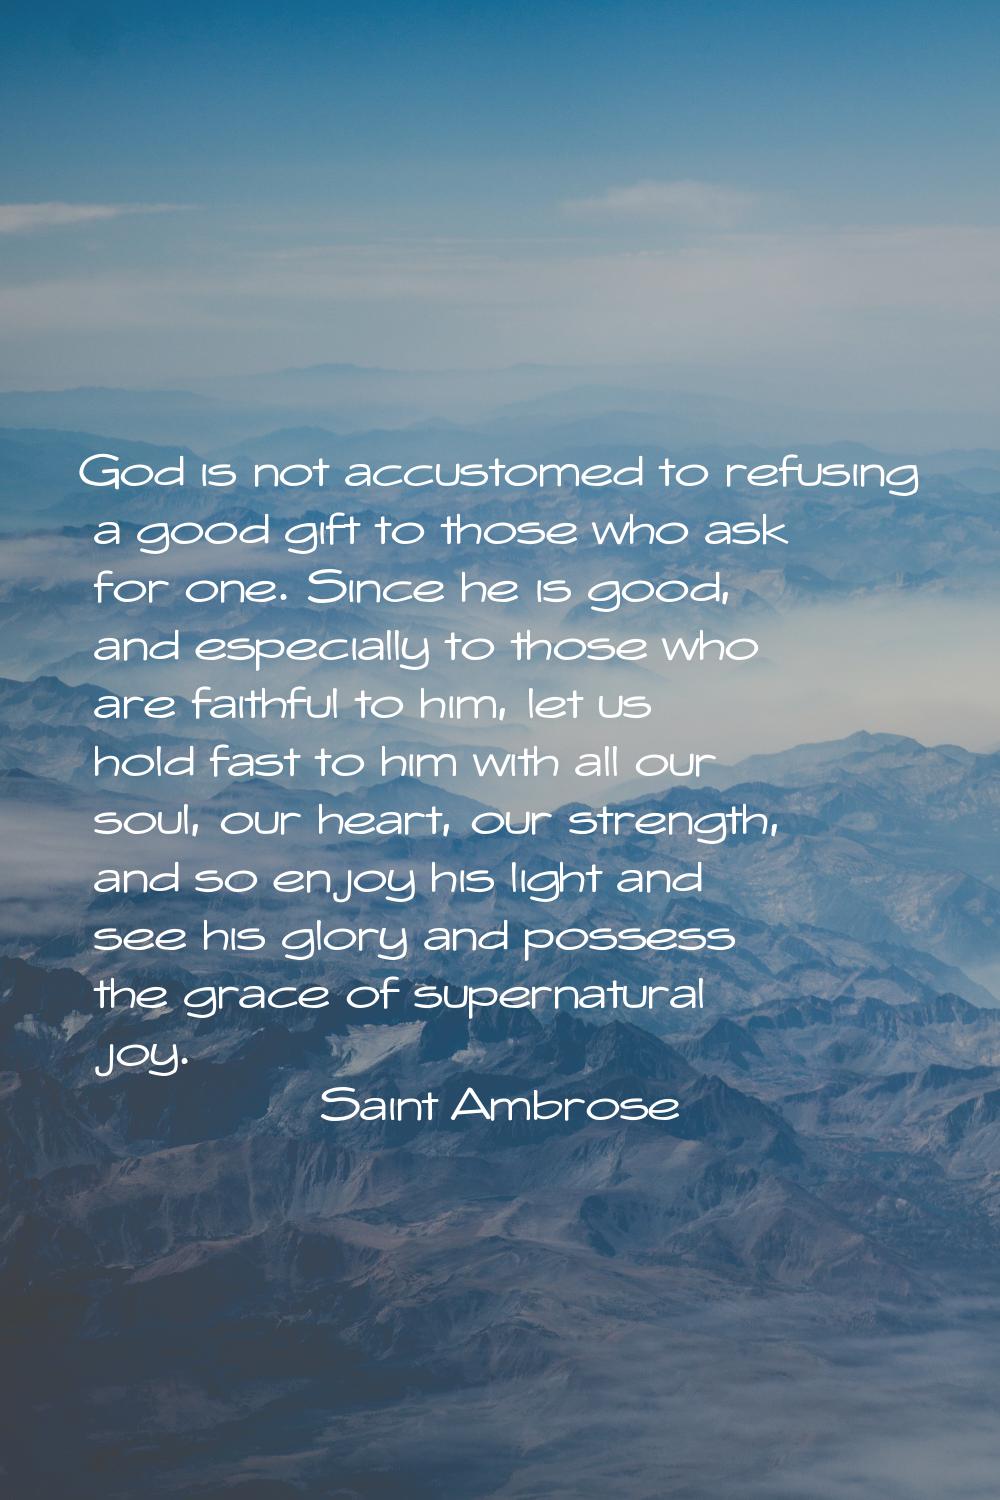 God is not accustomed to refusing a good gift to those who ask for one. Since he is good, and espec